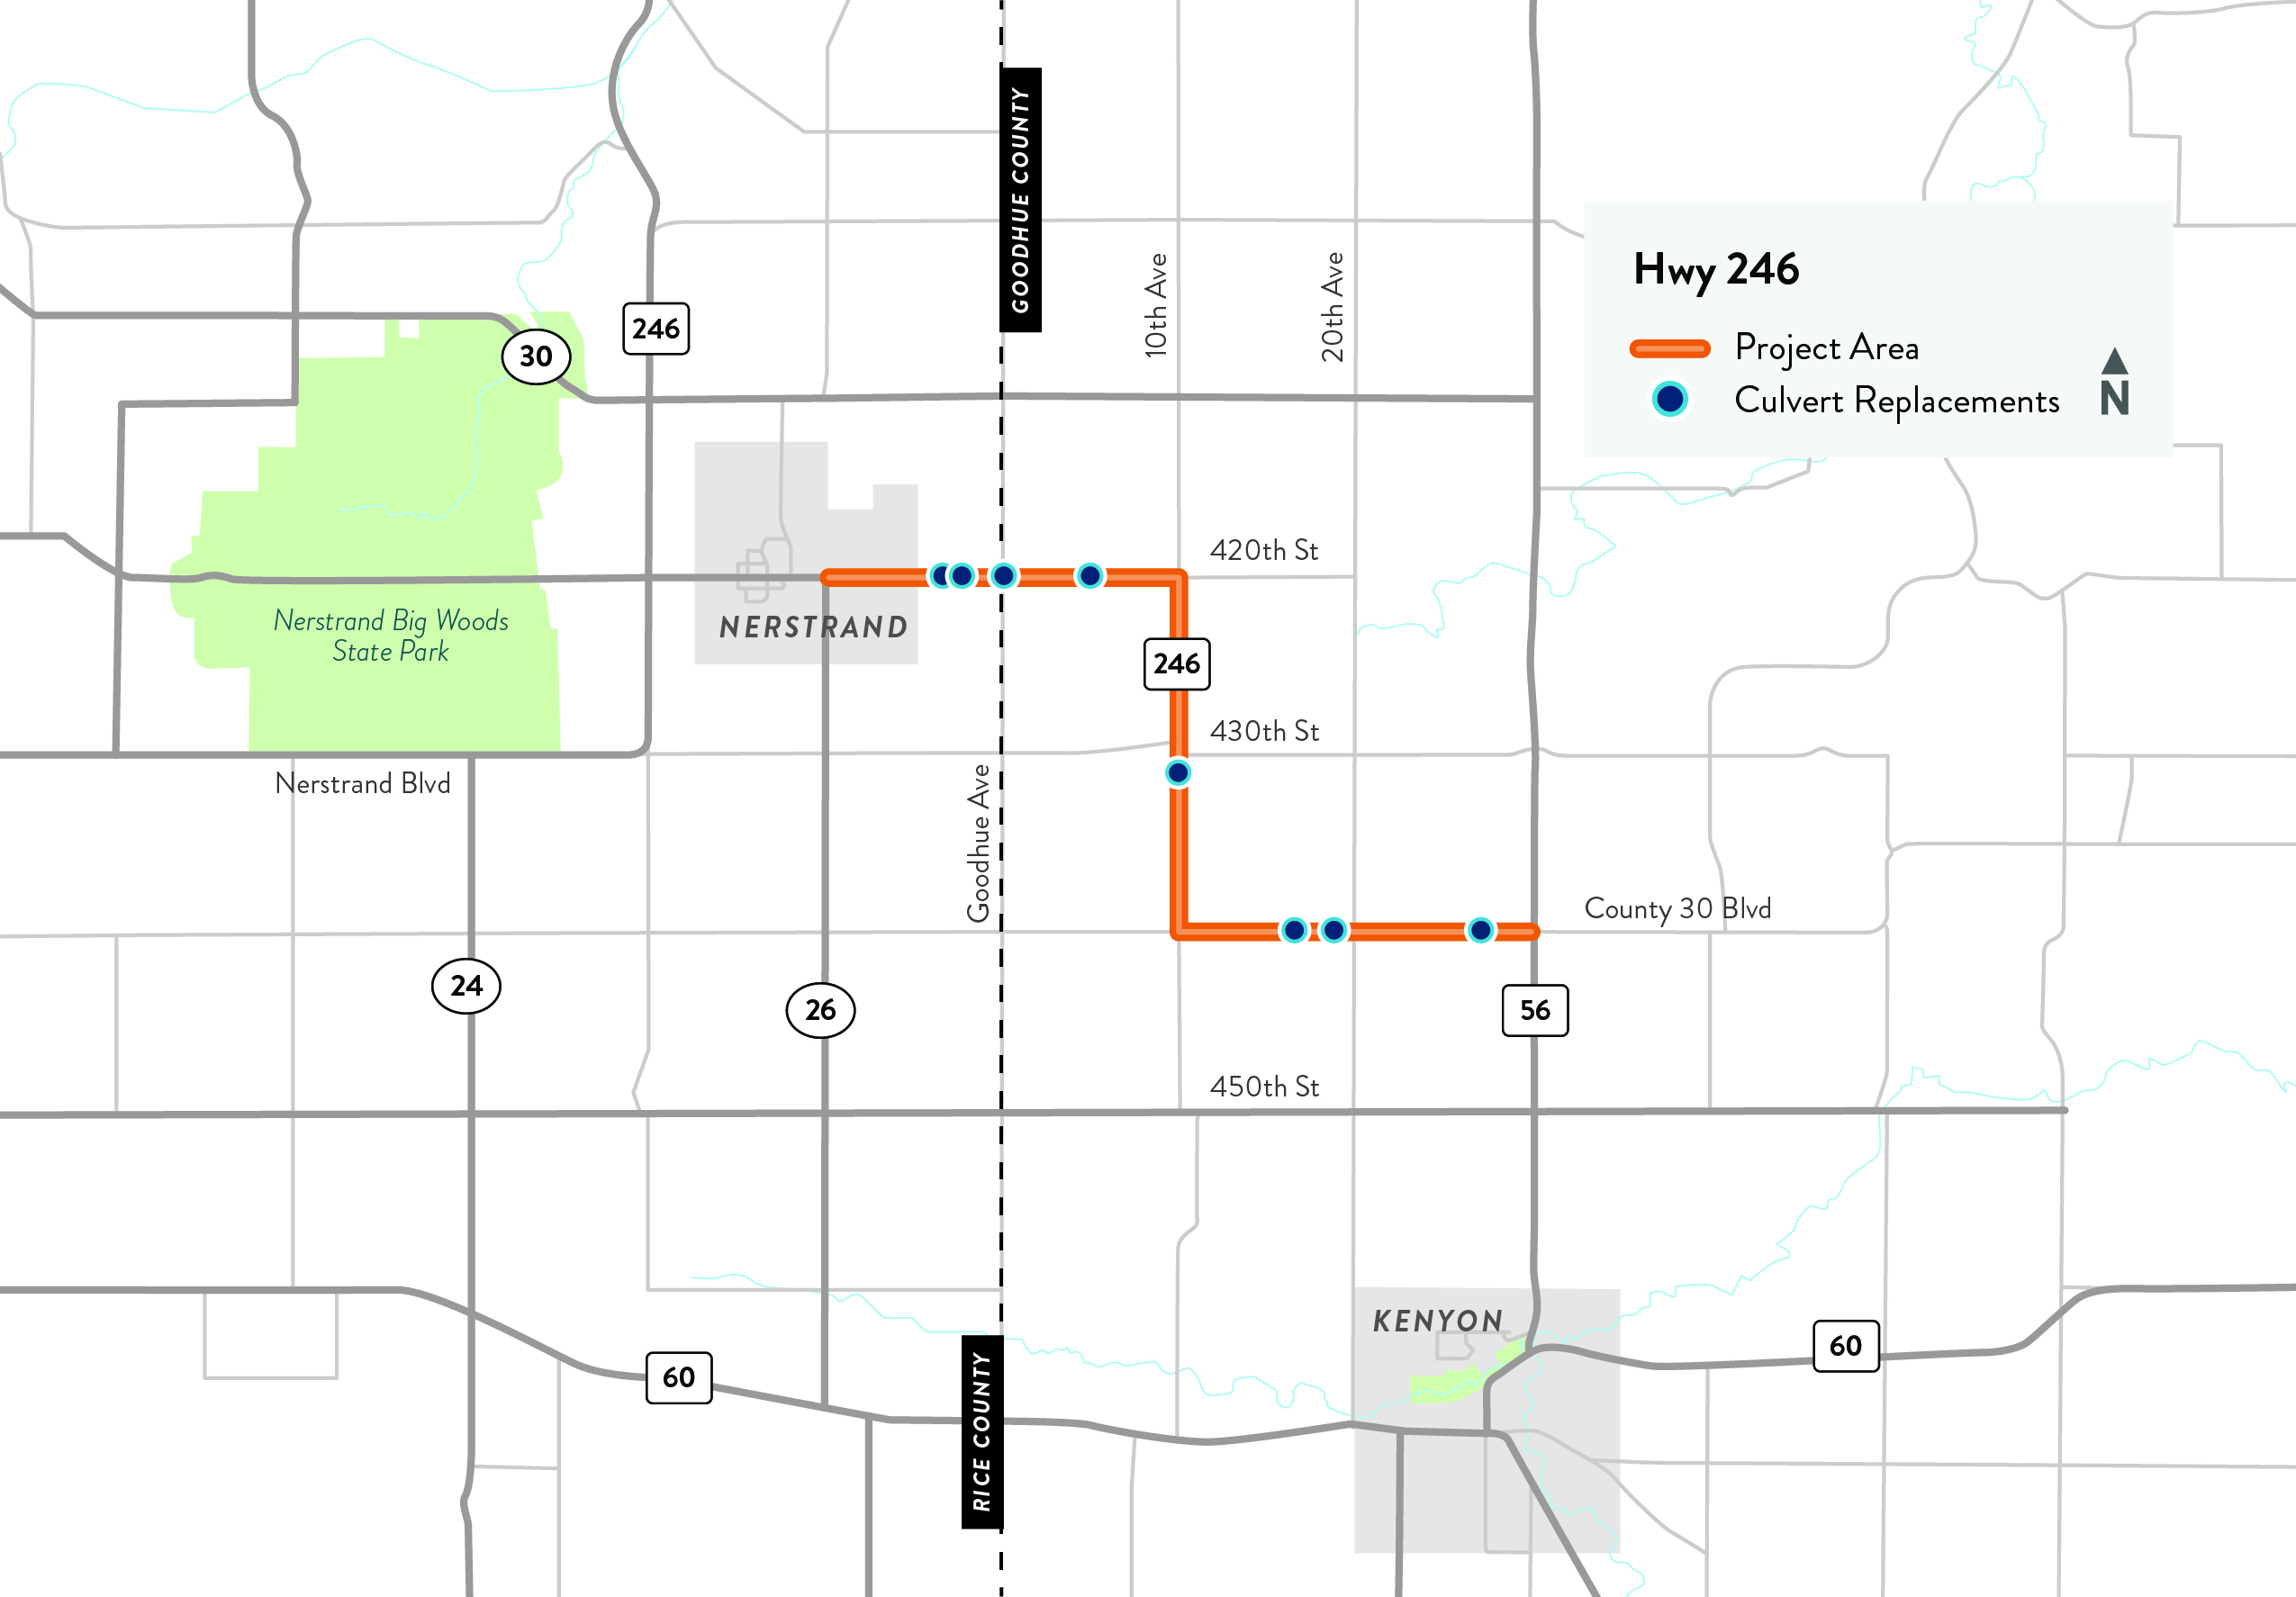 Map of project area highlighted in orange and blue dots for culvert replacements